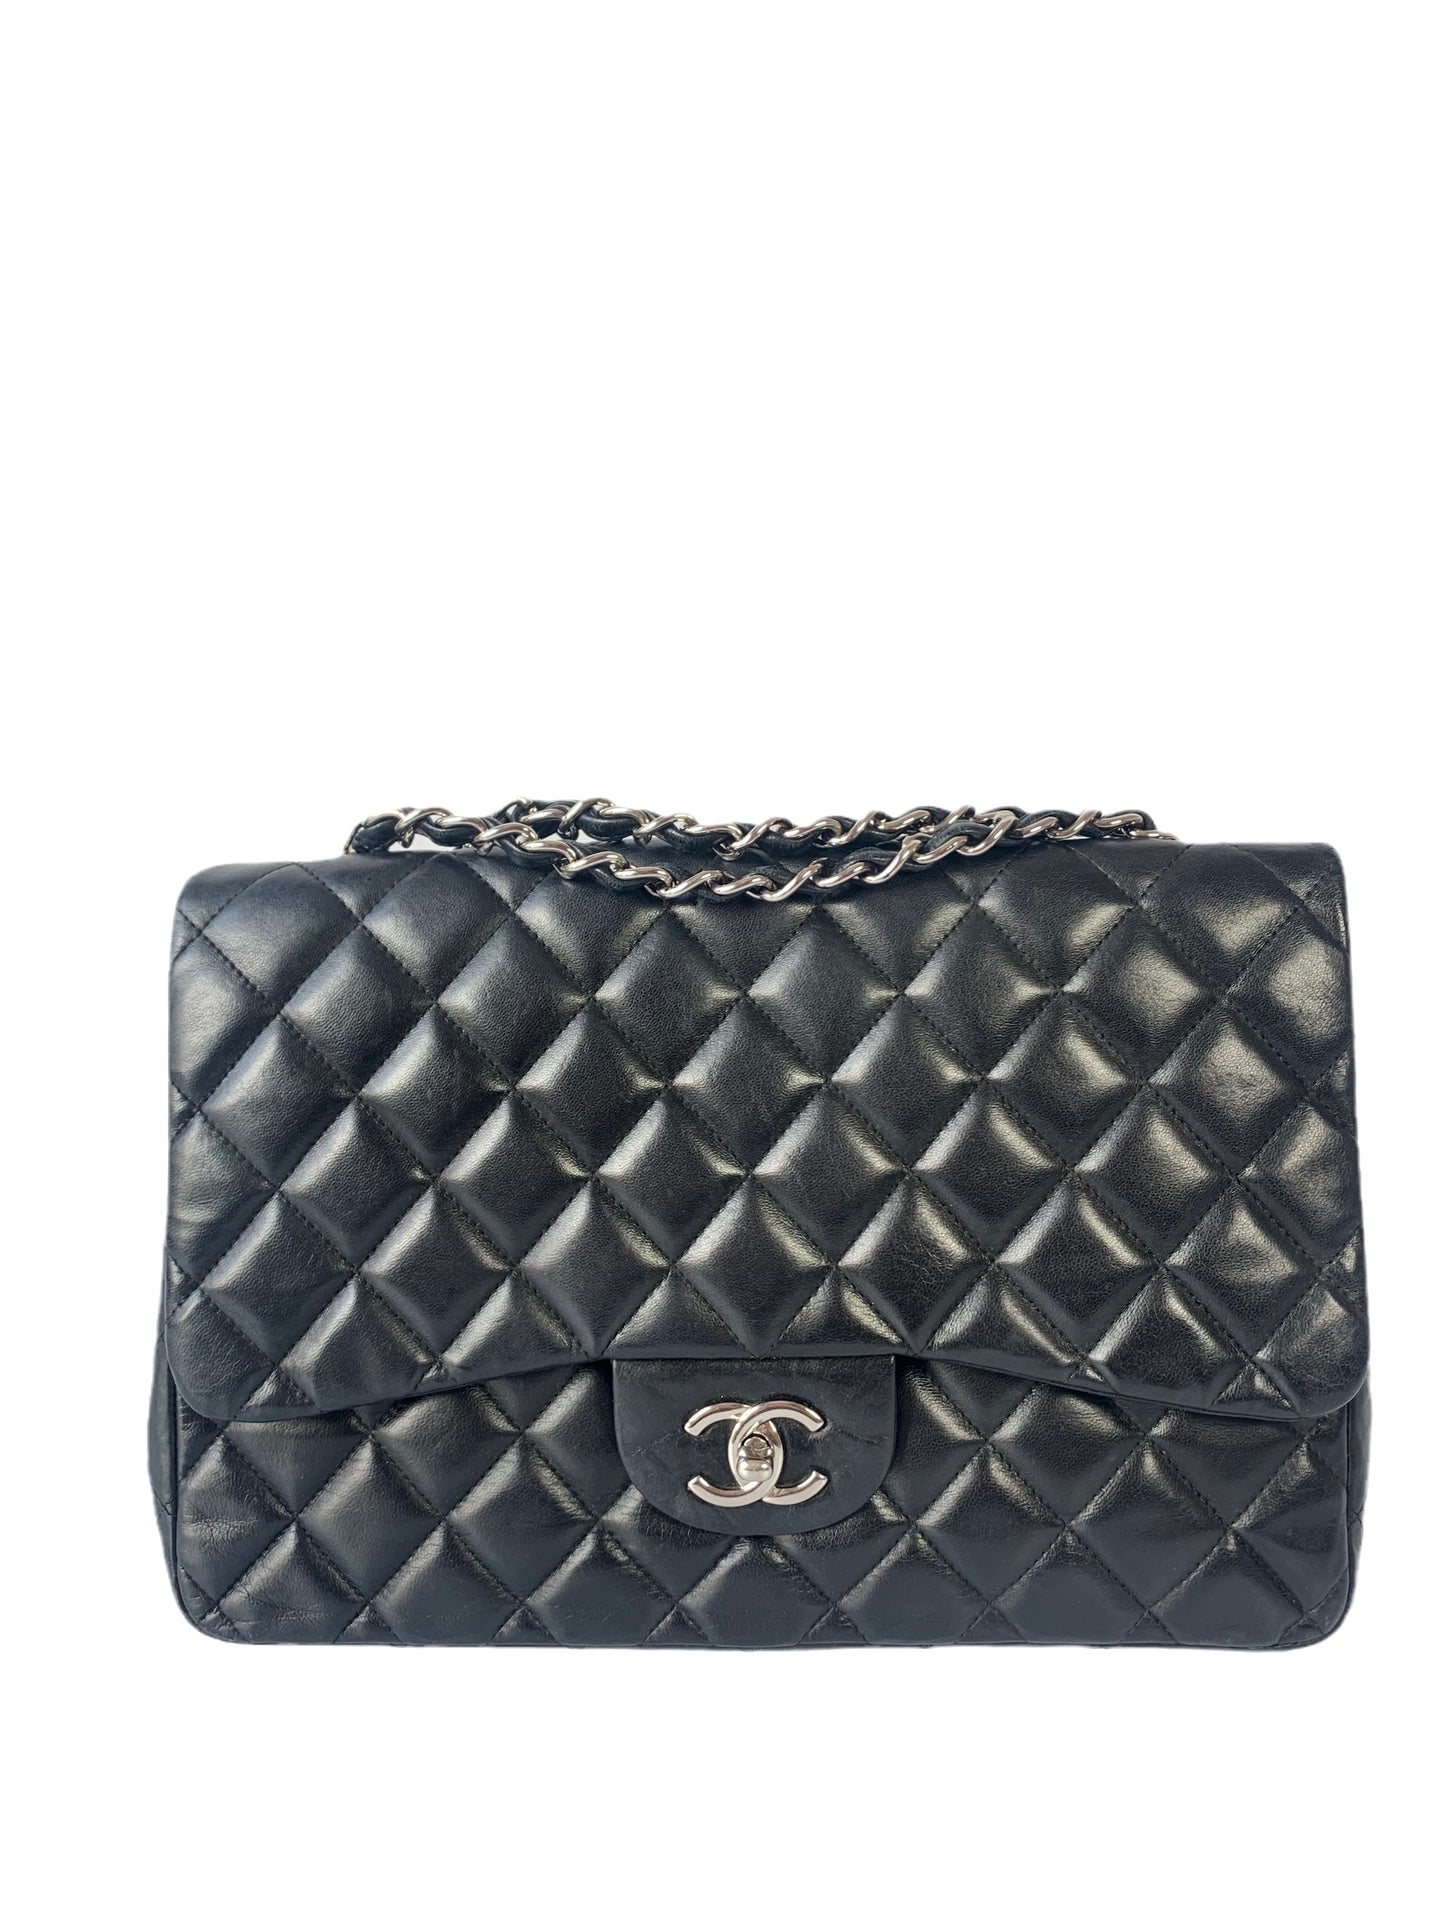 Chanel Classic Flap Jumbo Large Black Lambskin Leather with Silver hardware